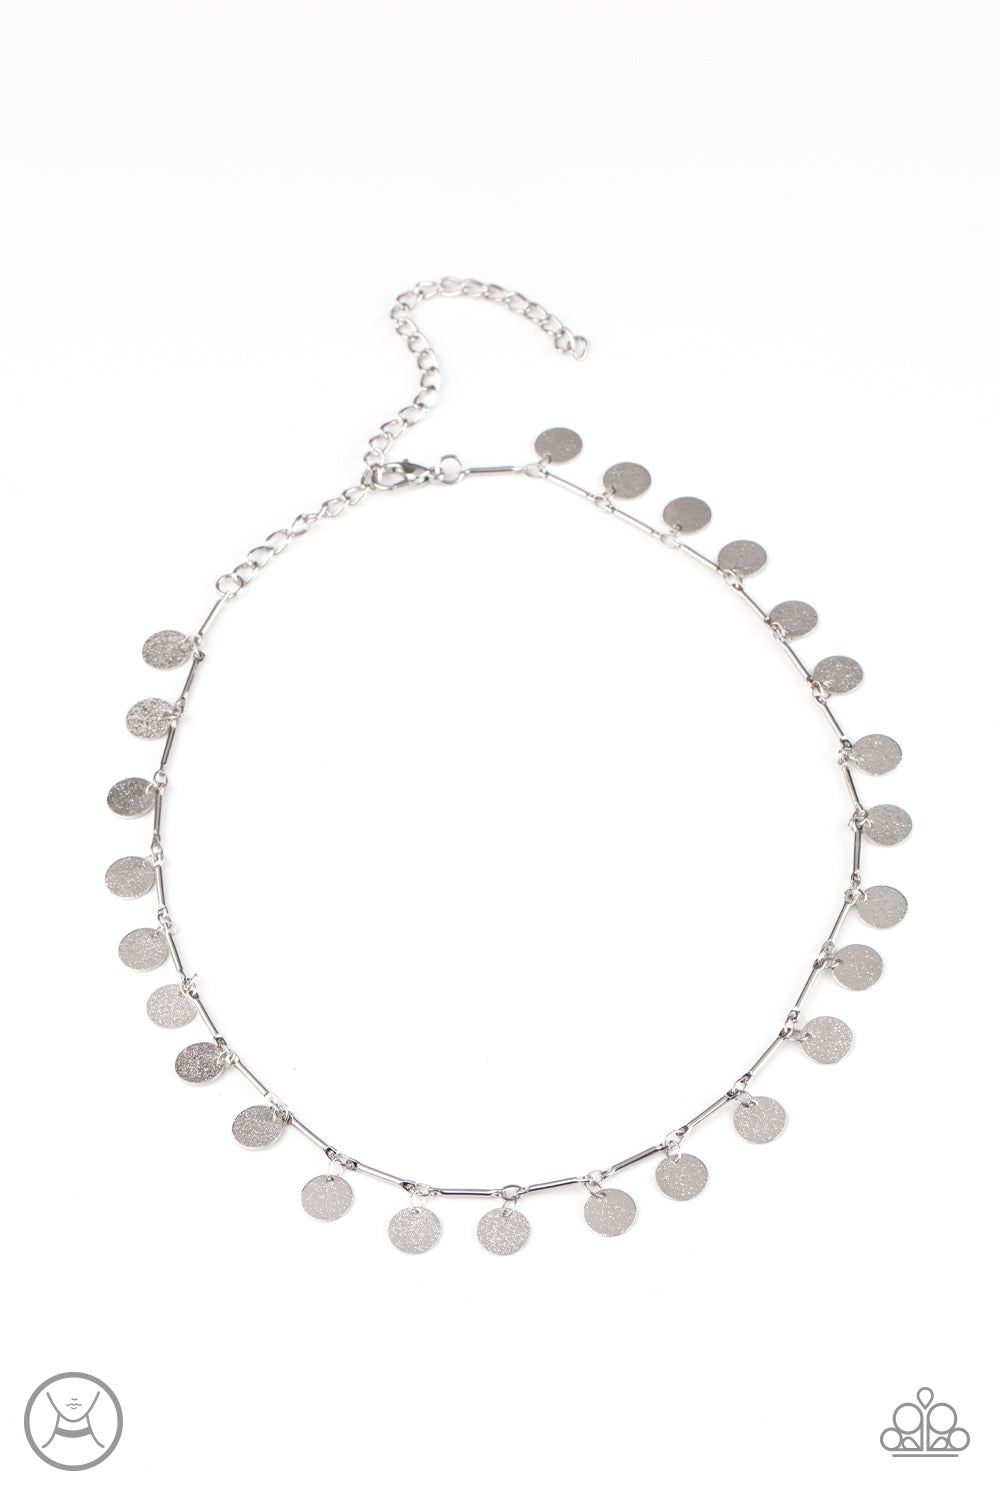 Musically Minimalist - Silver Necklace